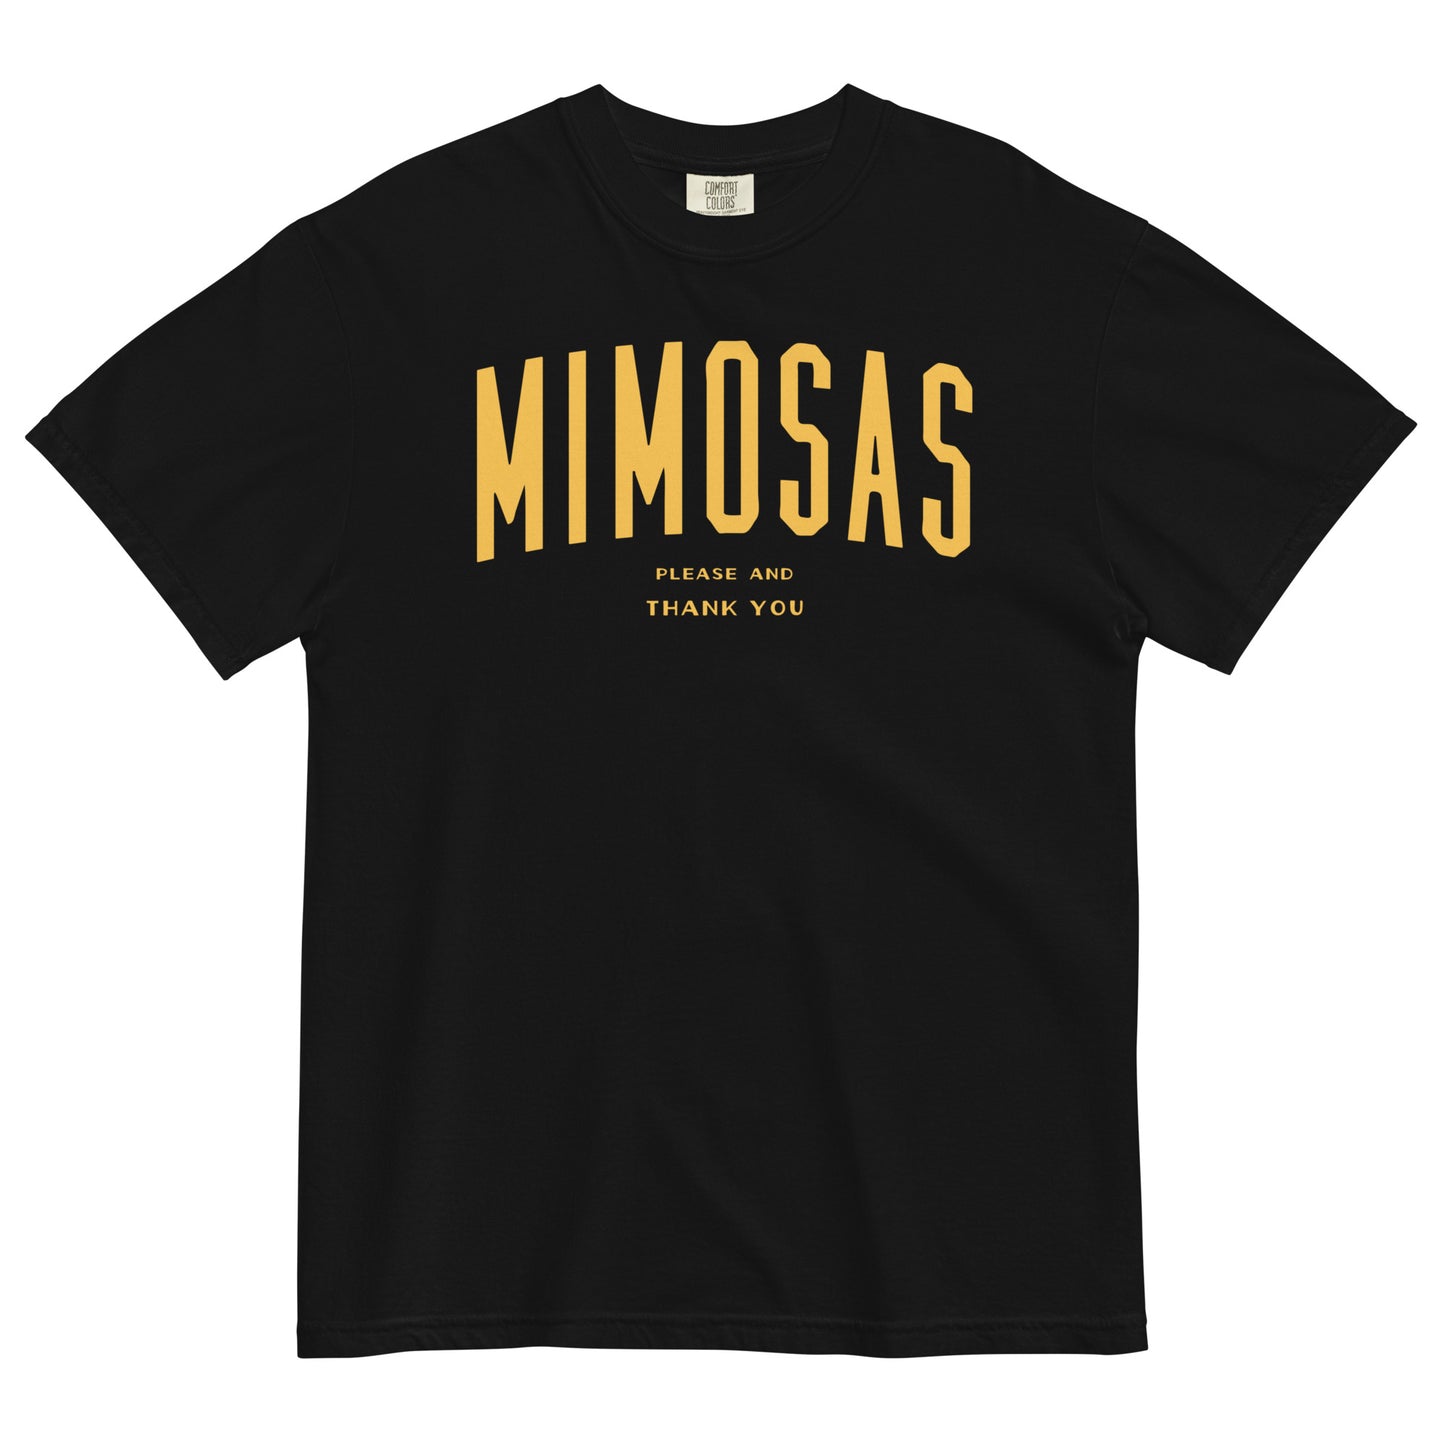 Mimosas Please And Thank You Men's Relaxed Fit Tee